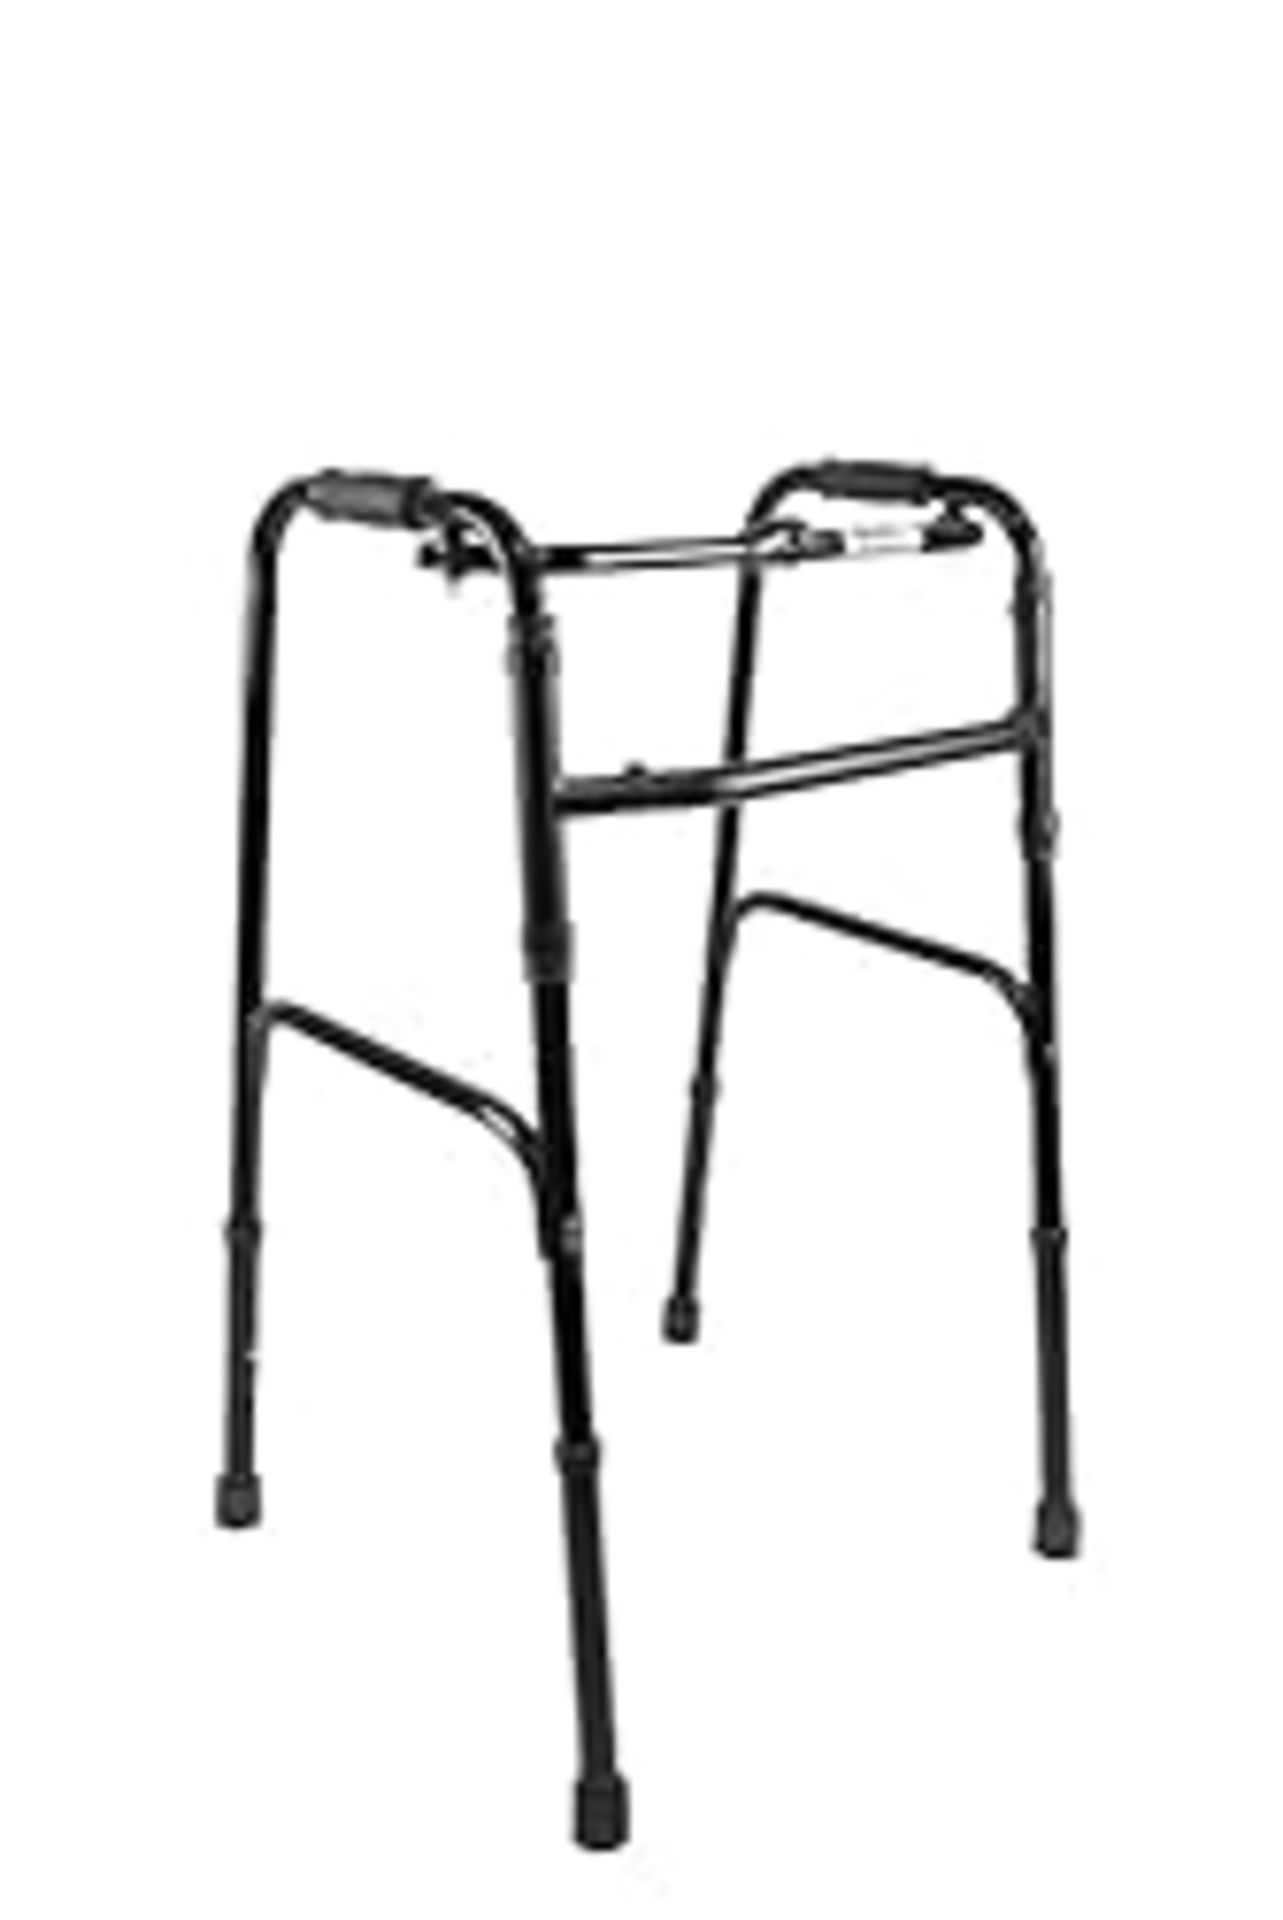 RRP £68.49 PEPE - Walking Frame without Wheels (Black Colour)